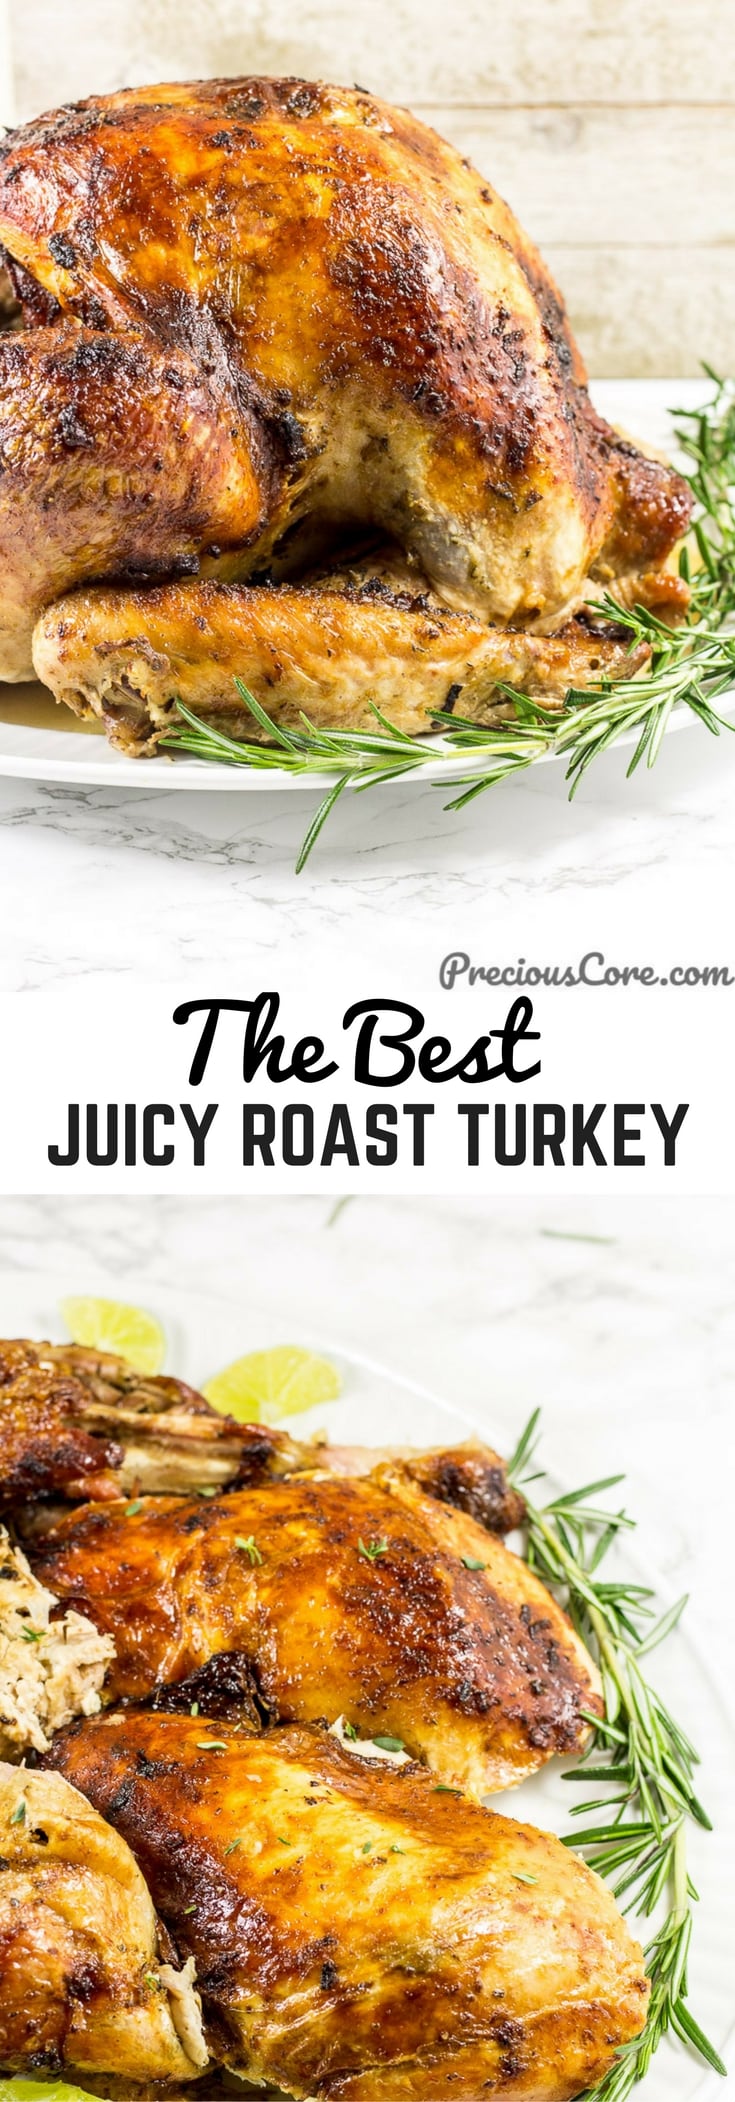 This is really the best Juicy Roast Turkey. Every little piece of the turkey tastes insanely good! The best turkey I have ever had! Get the recipe on Precious Core. #Thanksgiving #ThanksgivingTurkey #BestThanksgivingTurkeyRecipe